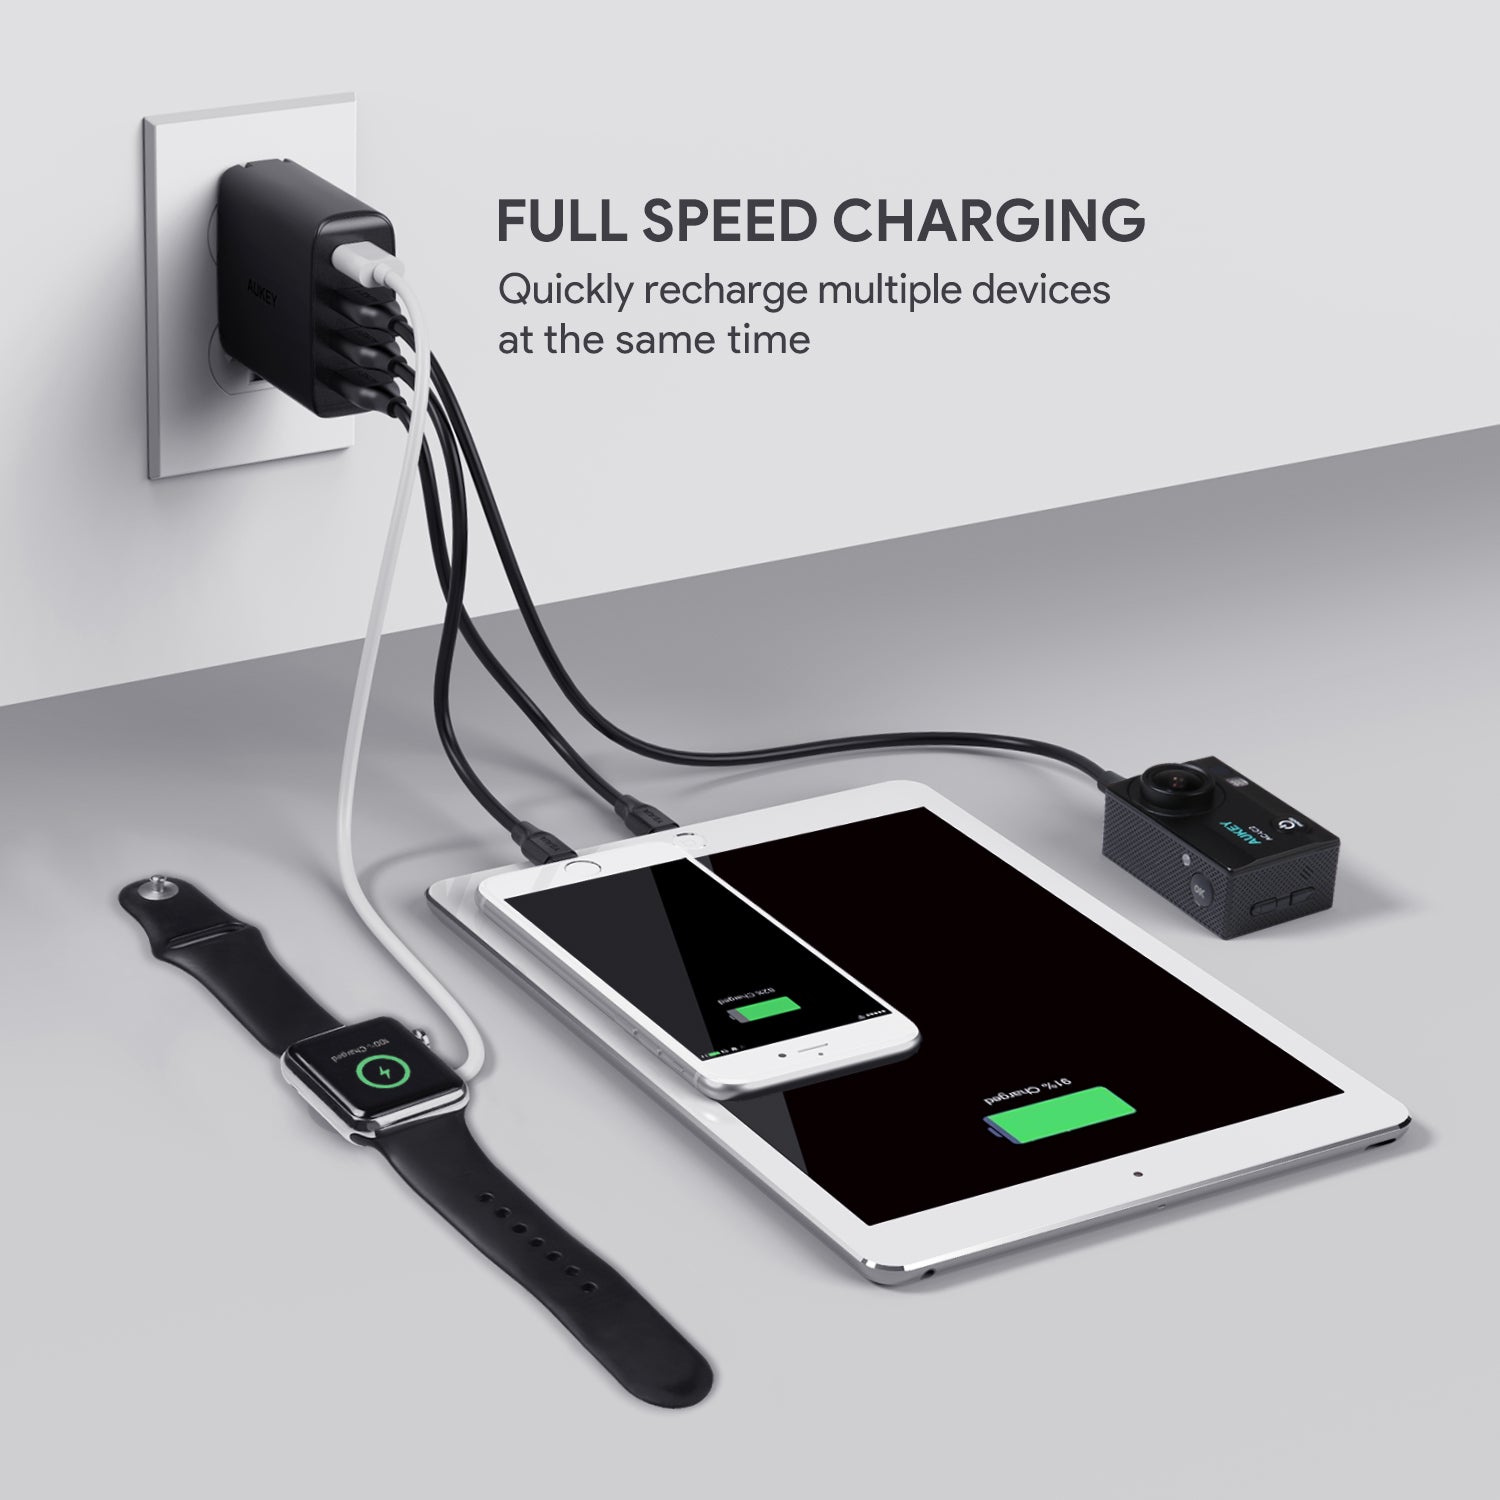 AUKEY USB Wall Charger 4 Ports with Foldable Plug